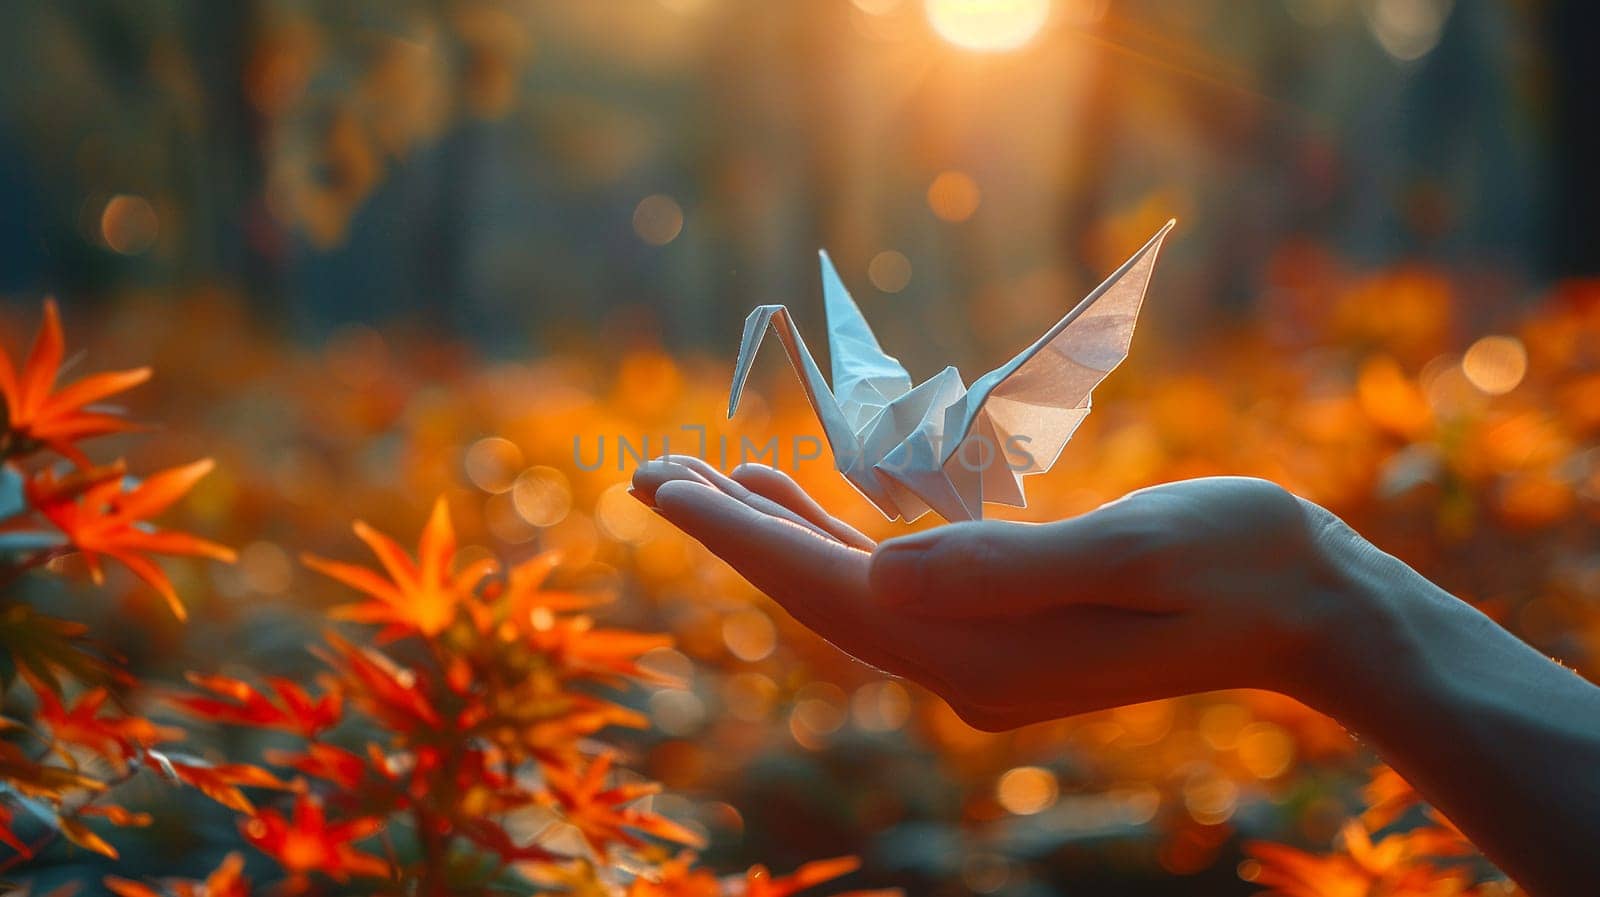 Hand holding an origami crane, symbolizing peace, creativity, and patience.